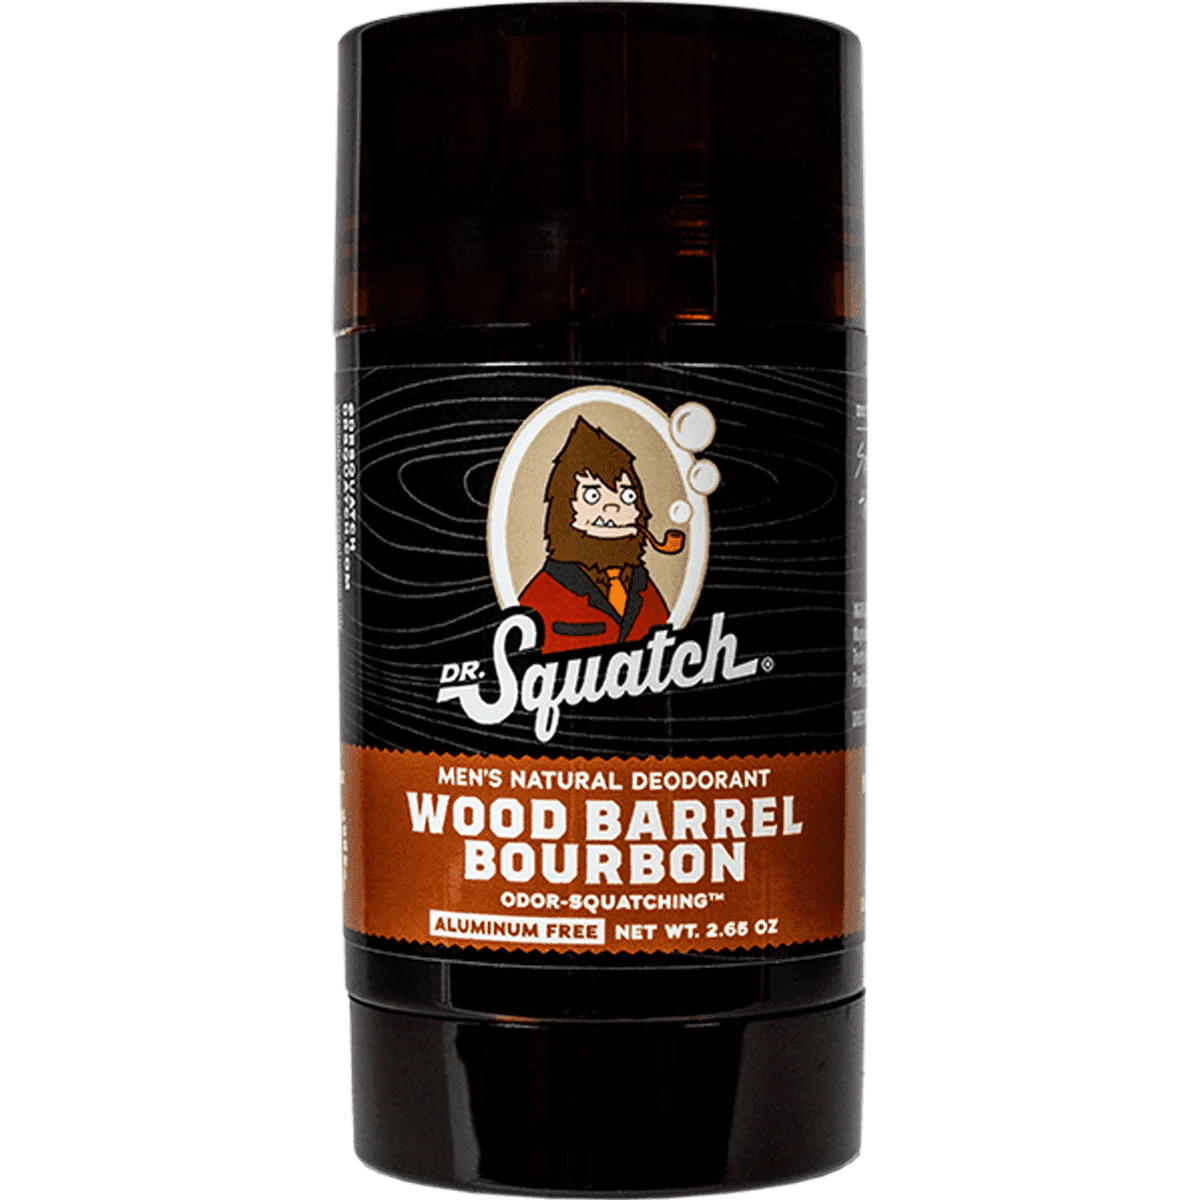 Dr. Squatch - Turn your shower into cocktail hour with the intoxicating  scent of Wood Barrel Bourbon . A boozy blend with aromas of patchouli,  clove and guaiac wood create this musky